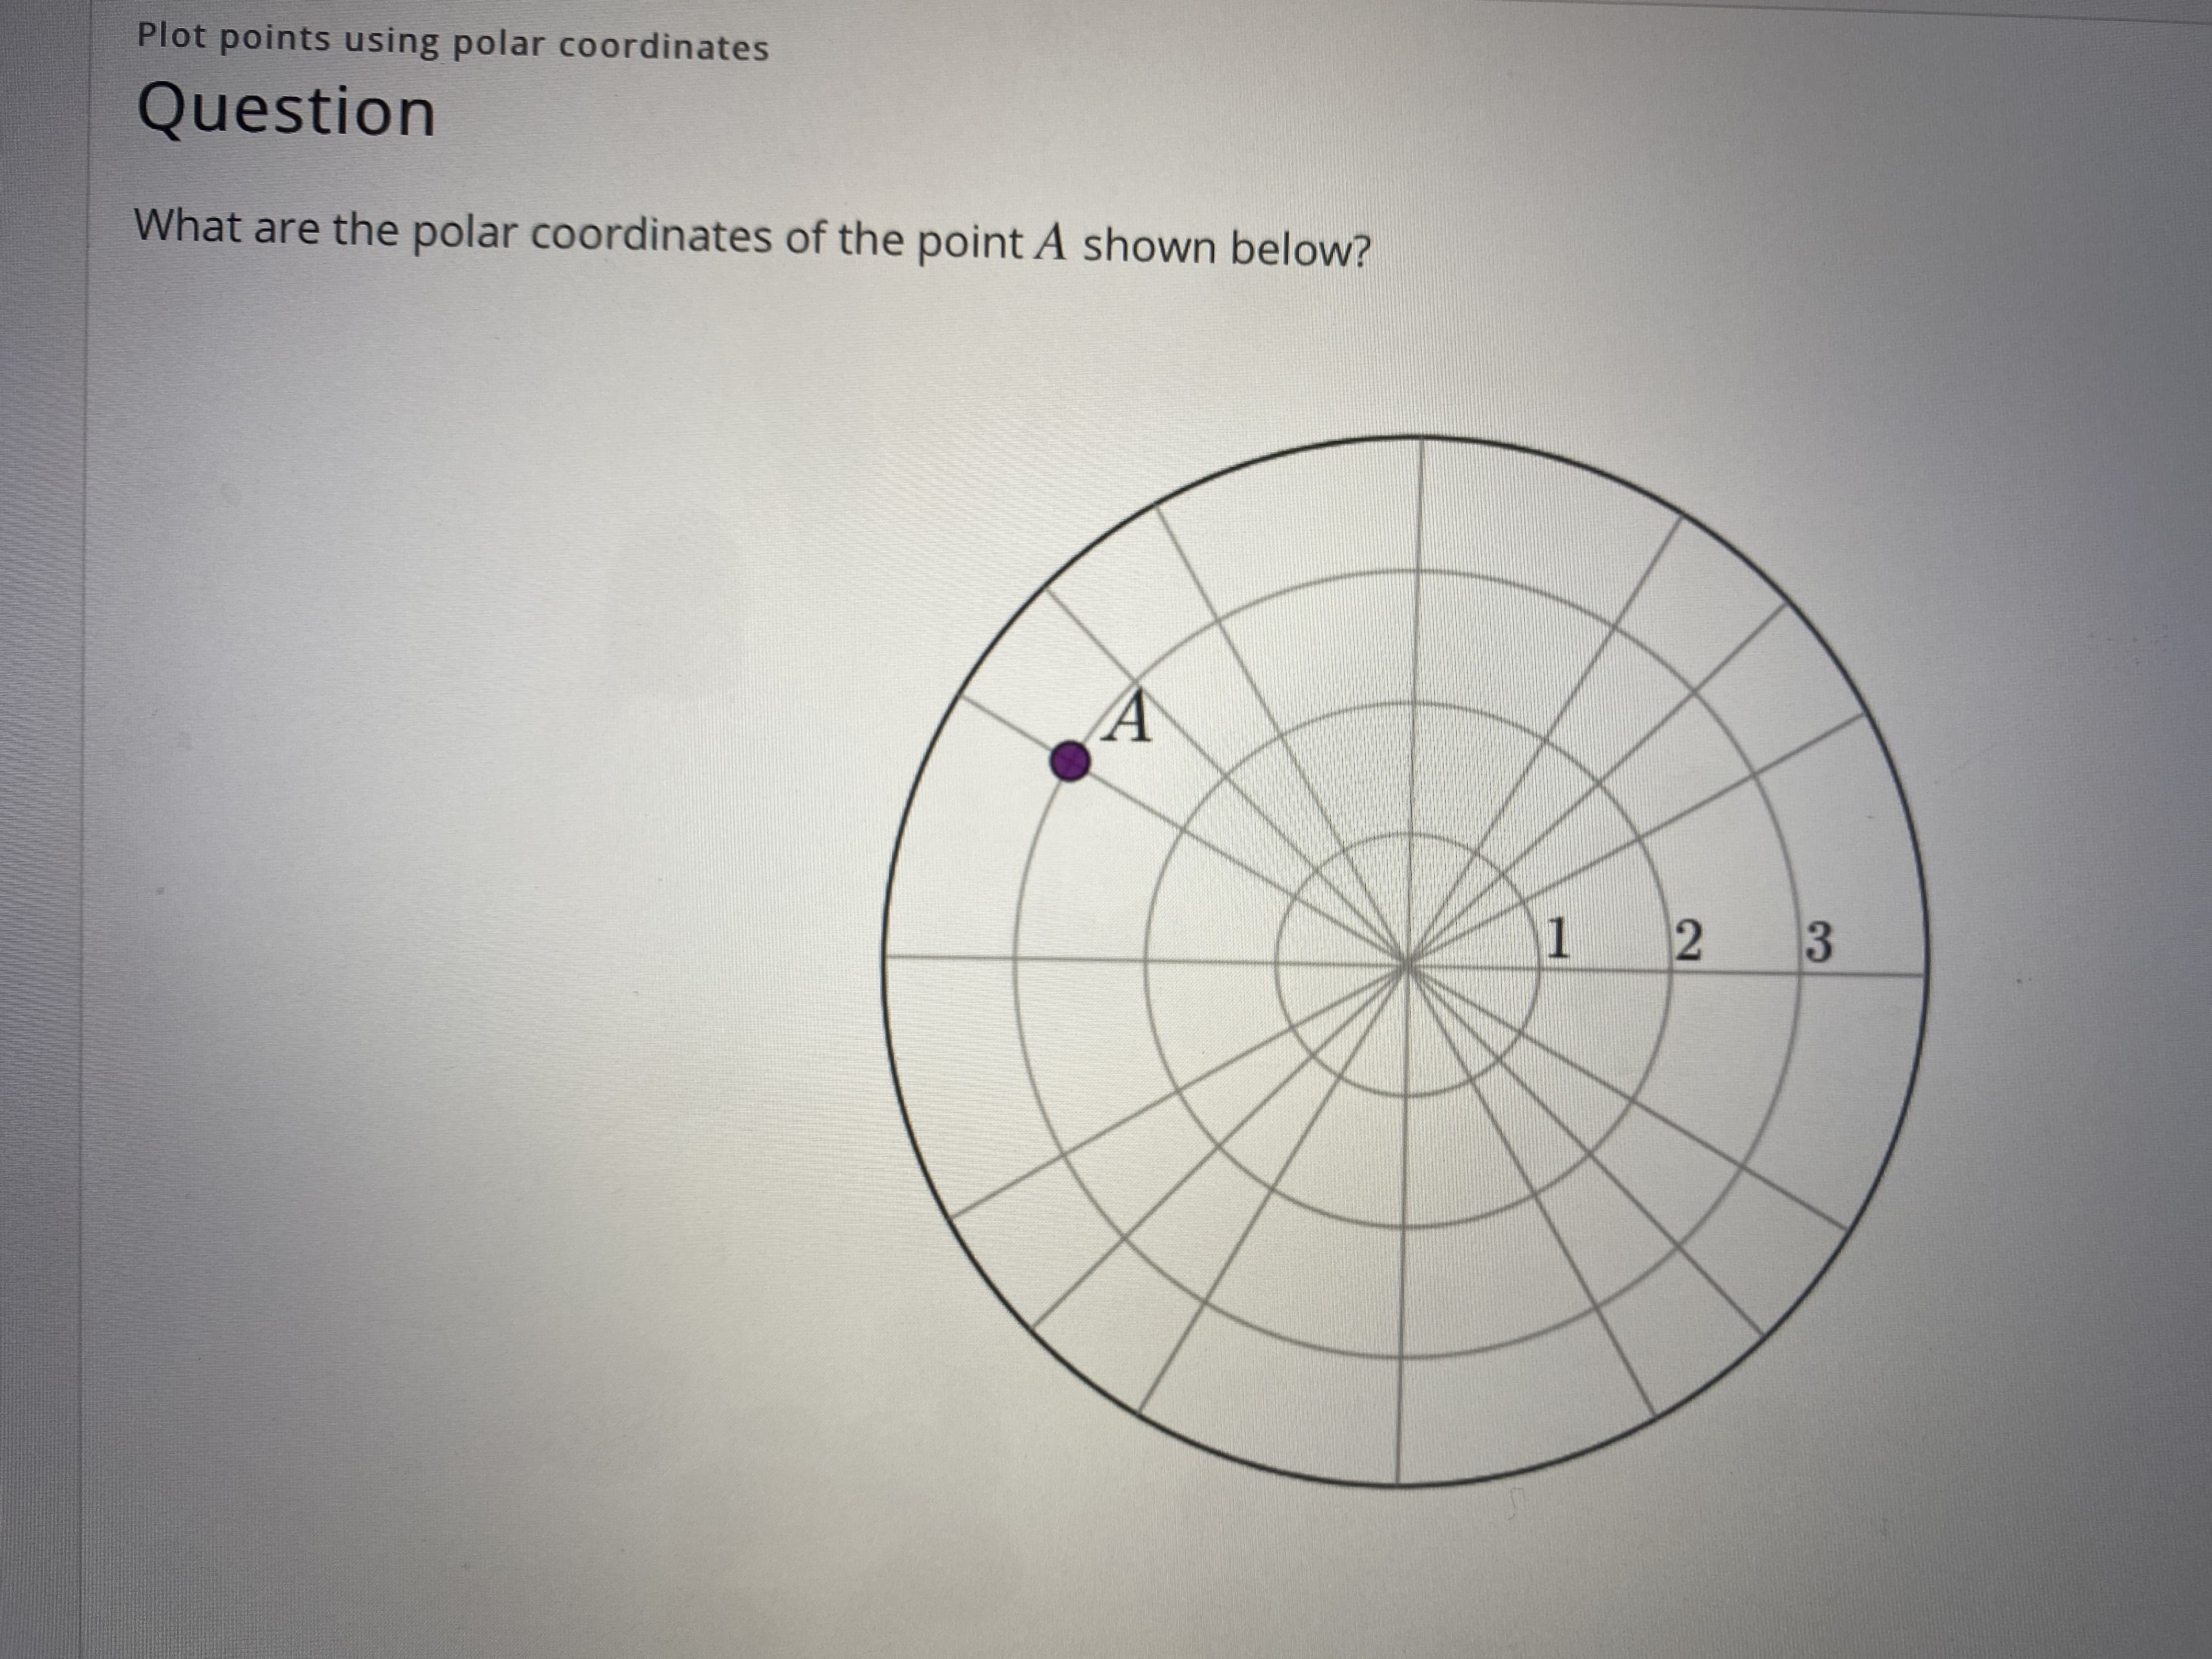 What are the polar coordinates of the point A shown below?
